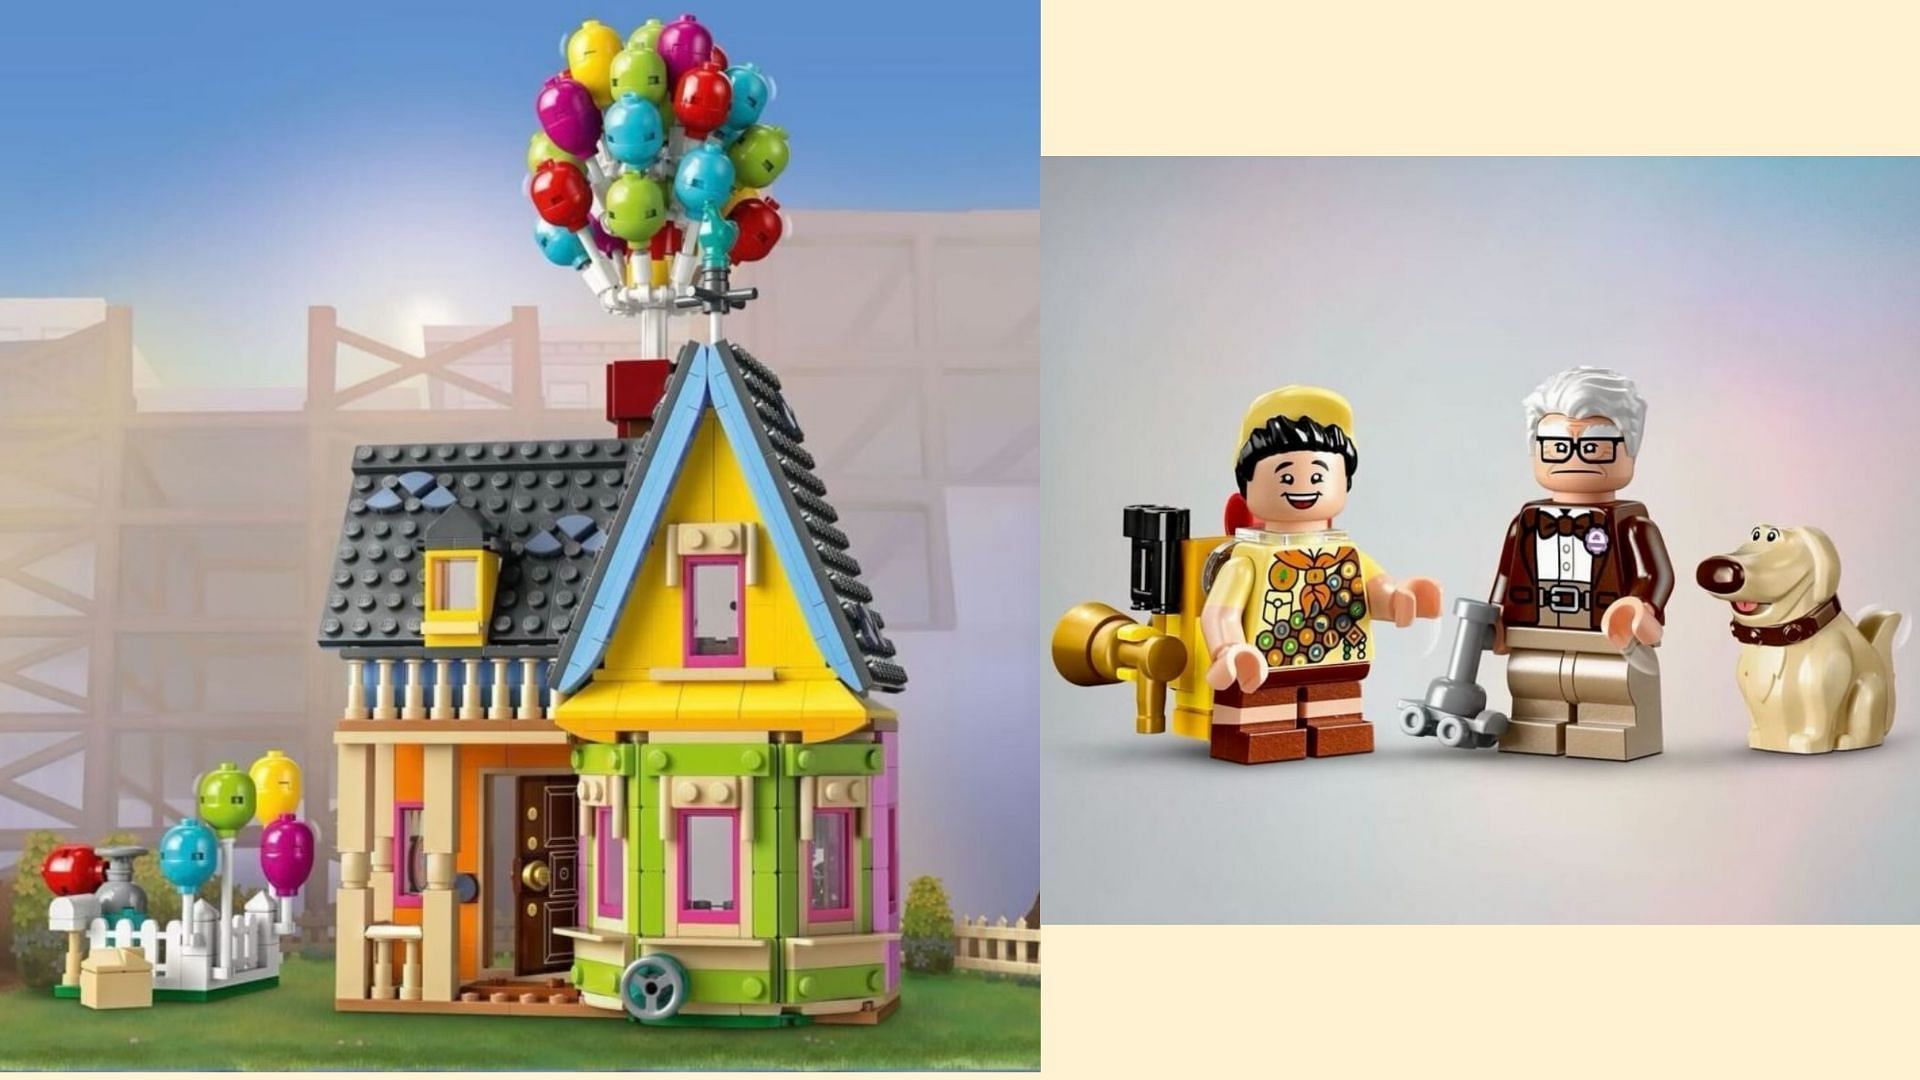 Leaked images of the Up House set expected to launch on April 1 (Image via Lego/leaks)